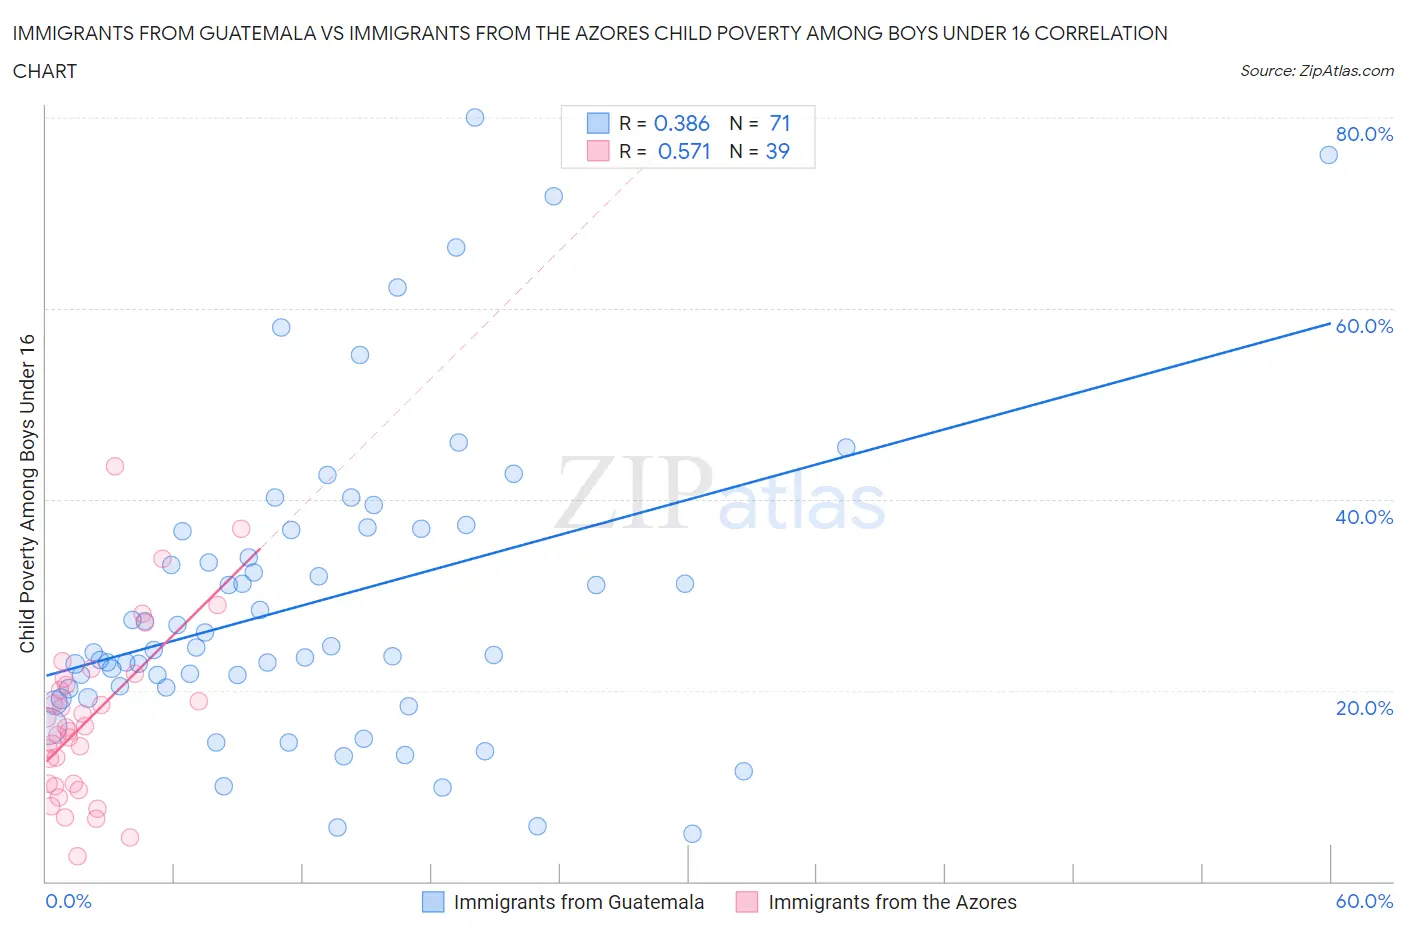 Immigrants from Guatemala vs Immigrants from the Azores Child Poverty Among Boys Under 16